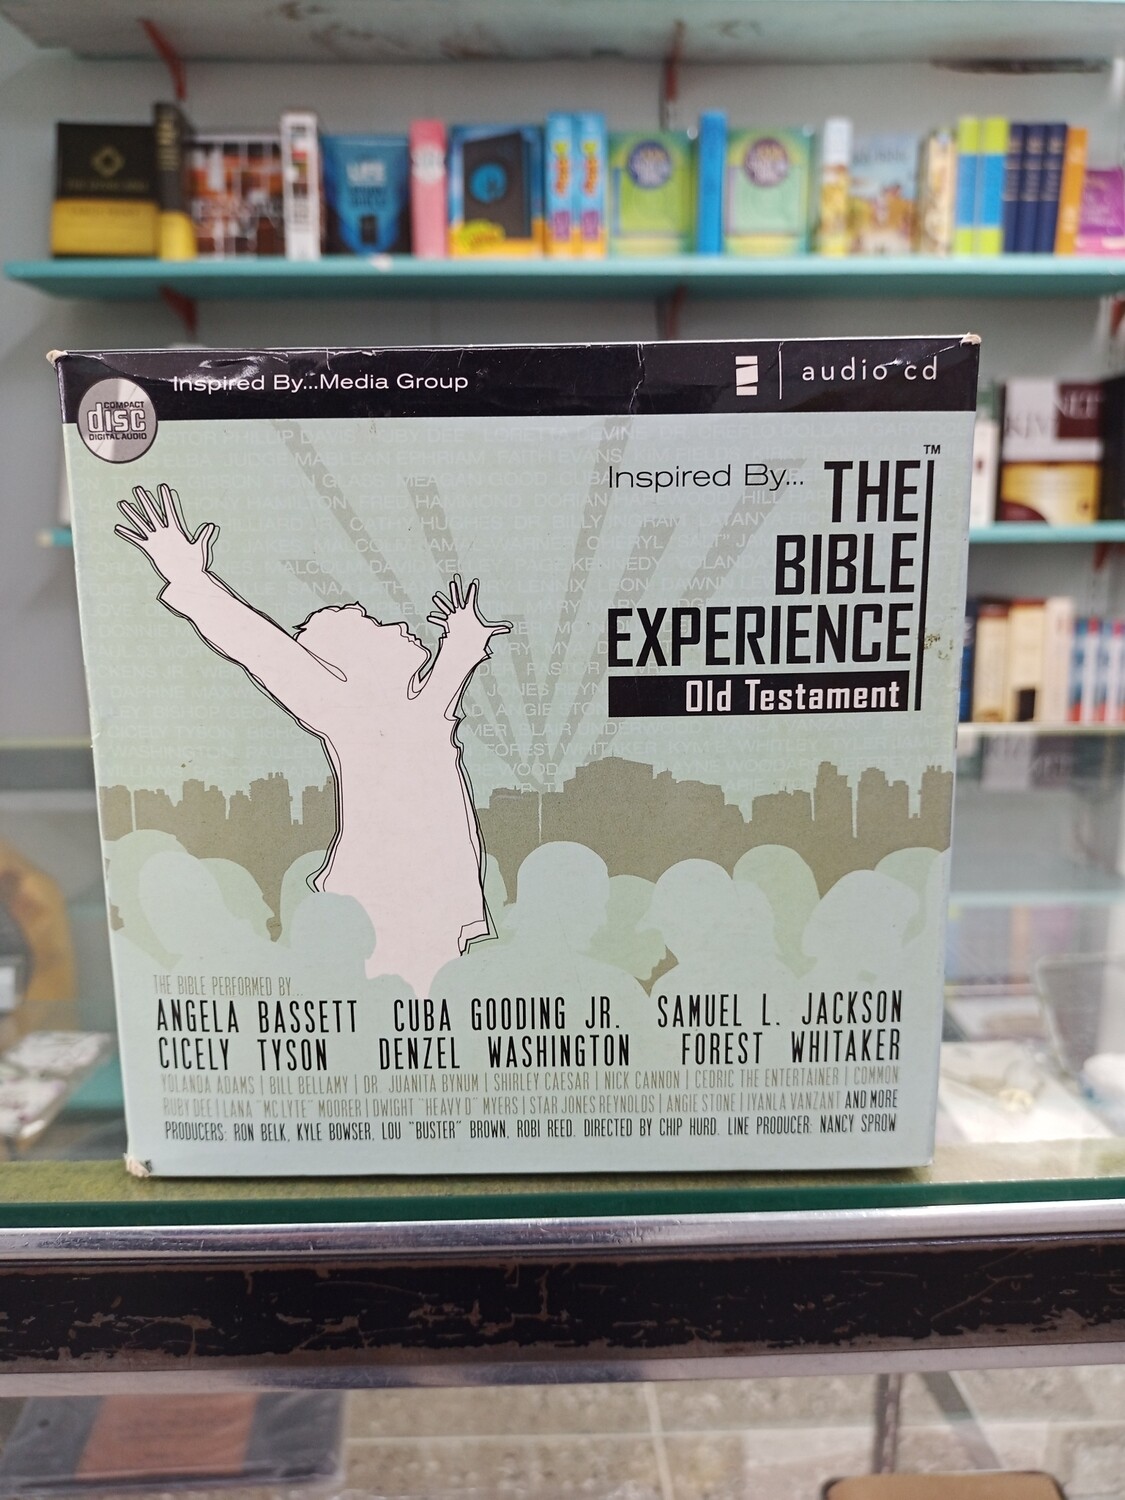 Inspired by...The Bible Experience - Box set of Audio CDs